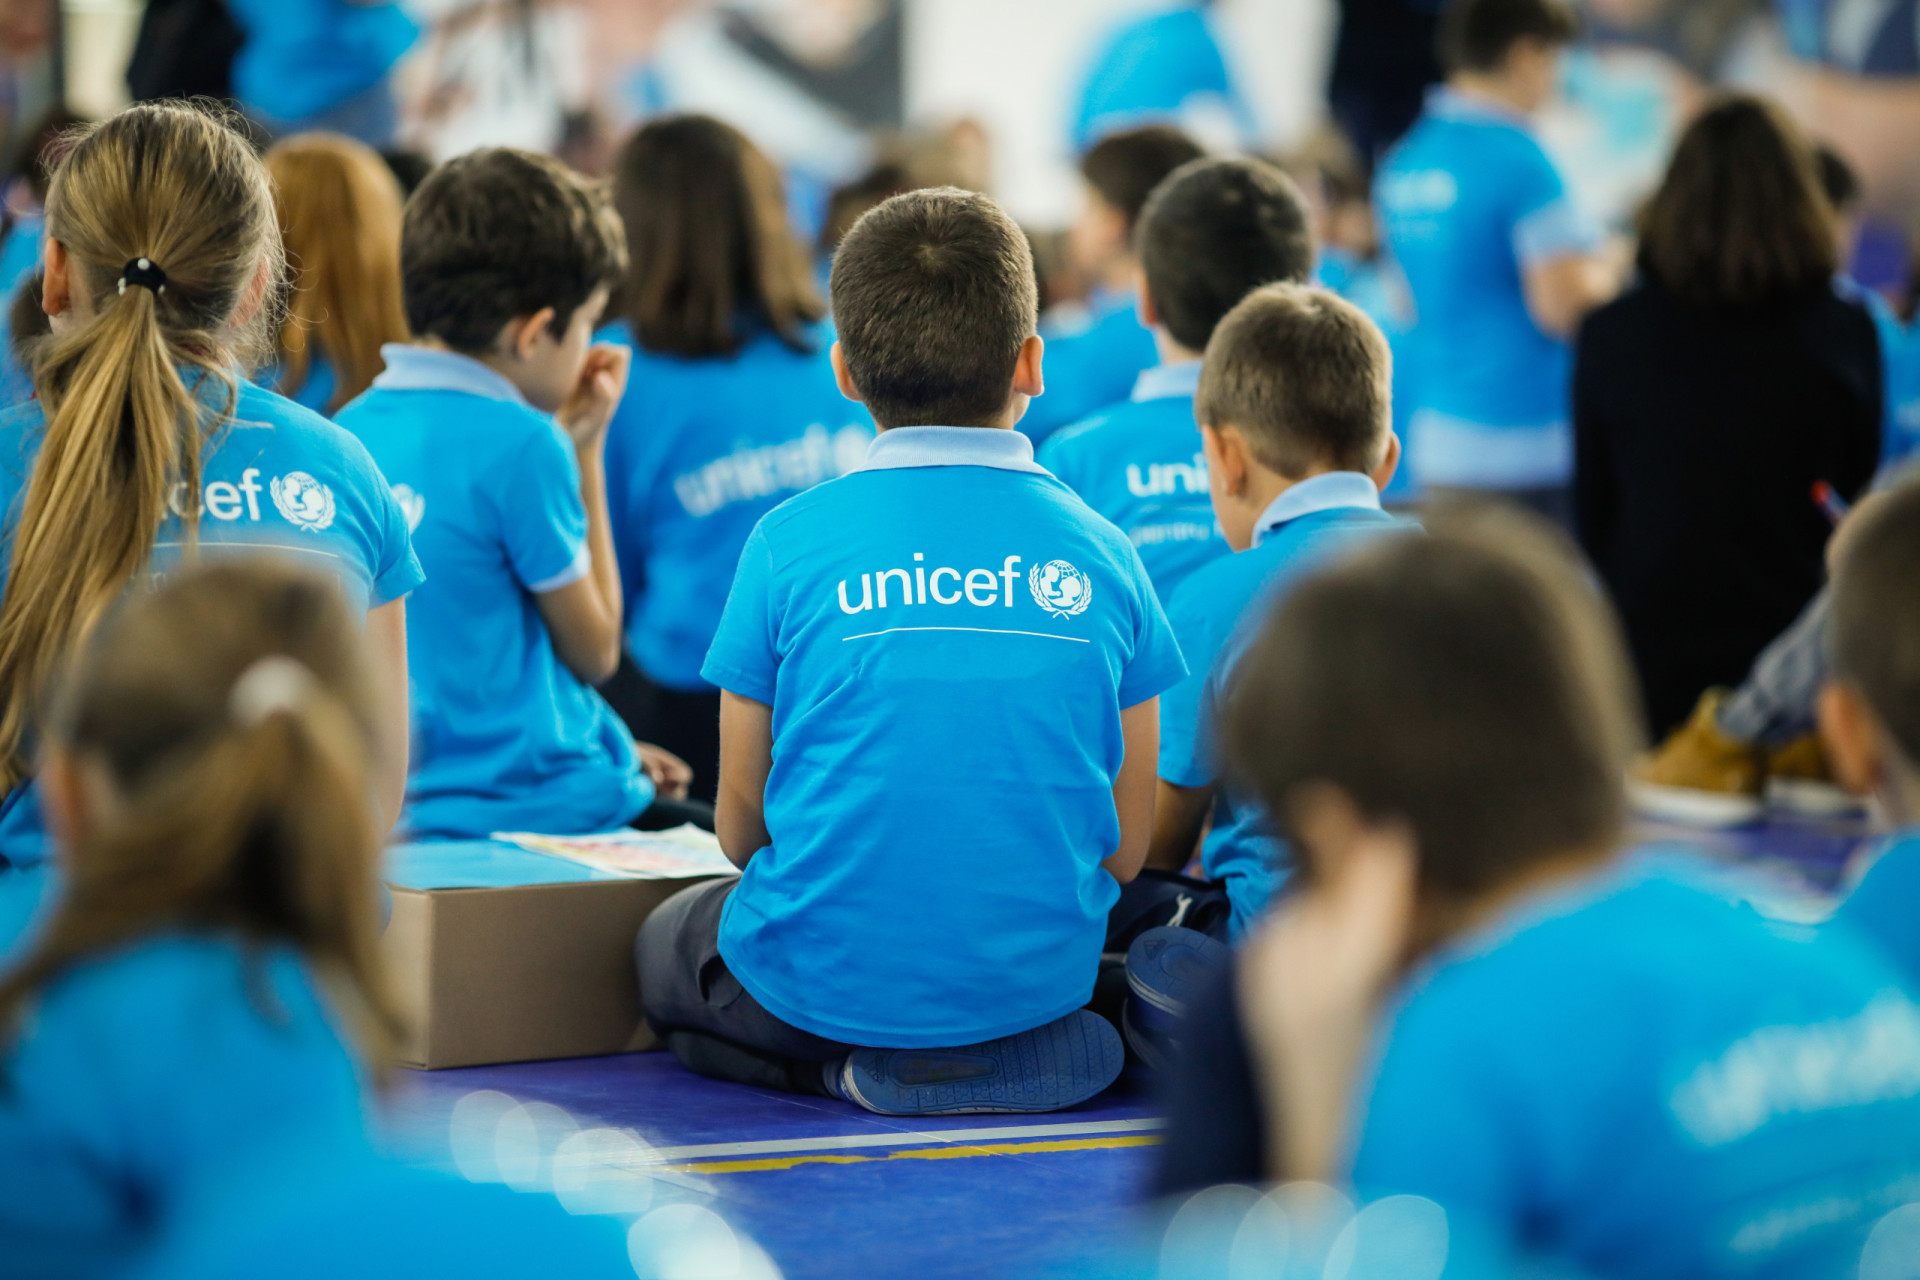 <p>UNICEF is the United Nations International Children’s Emergency Fund. They provide funding to help children in crisis around the world.</p><p>You may also like:<a href="https://www.starsinsider.com/n/386539?utm_source=msn.com&utm_medium=display&utm_campaign=referral_description&utm_content=537630en-ae"> Beer brands that Americans can't get enough of</a></p>